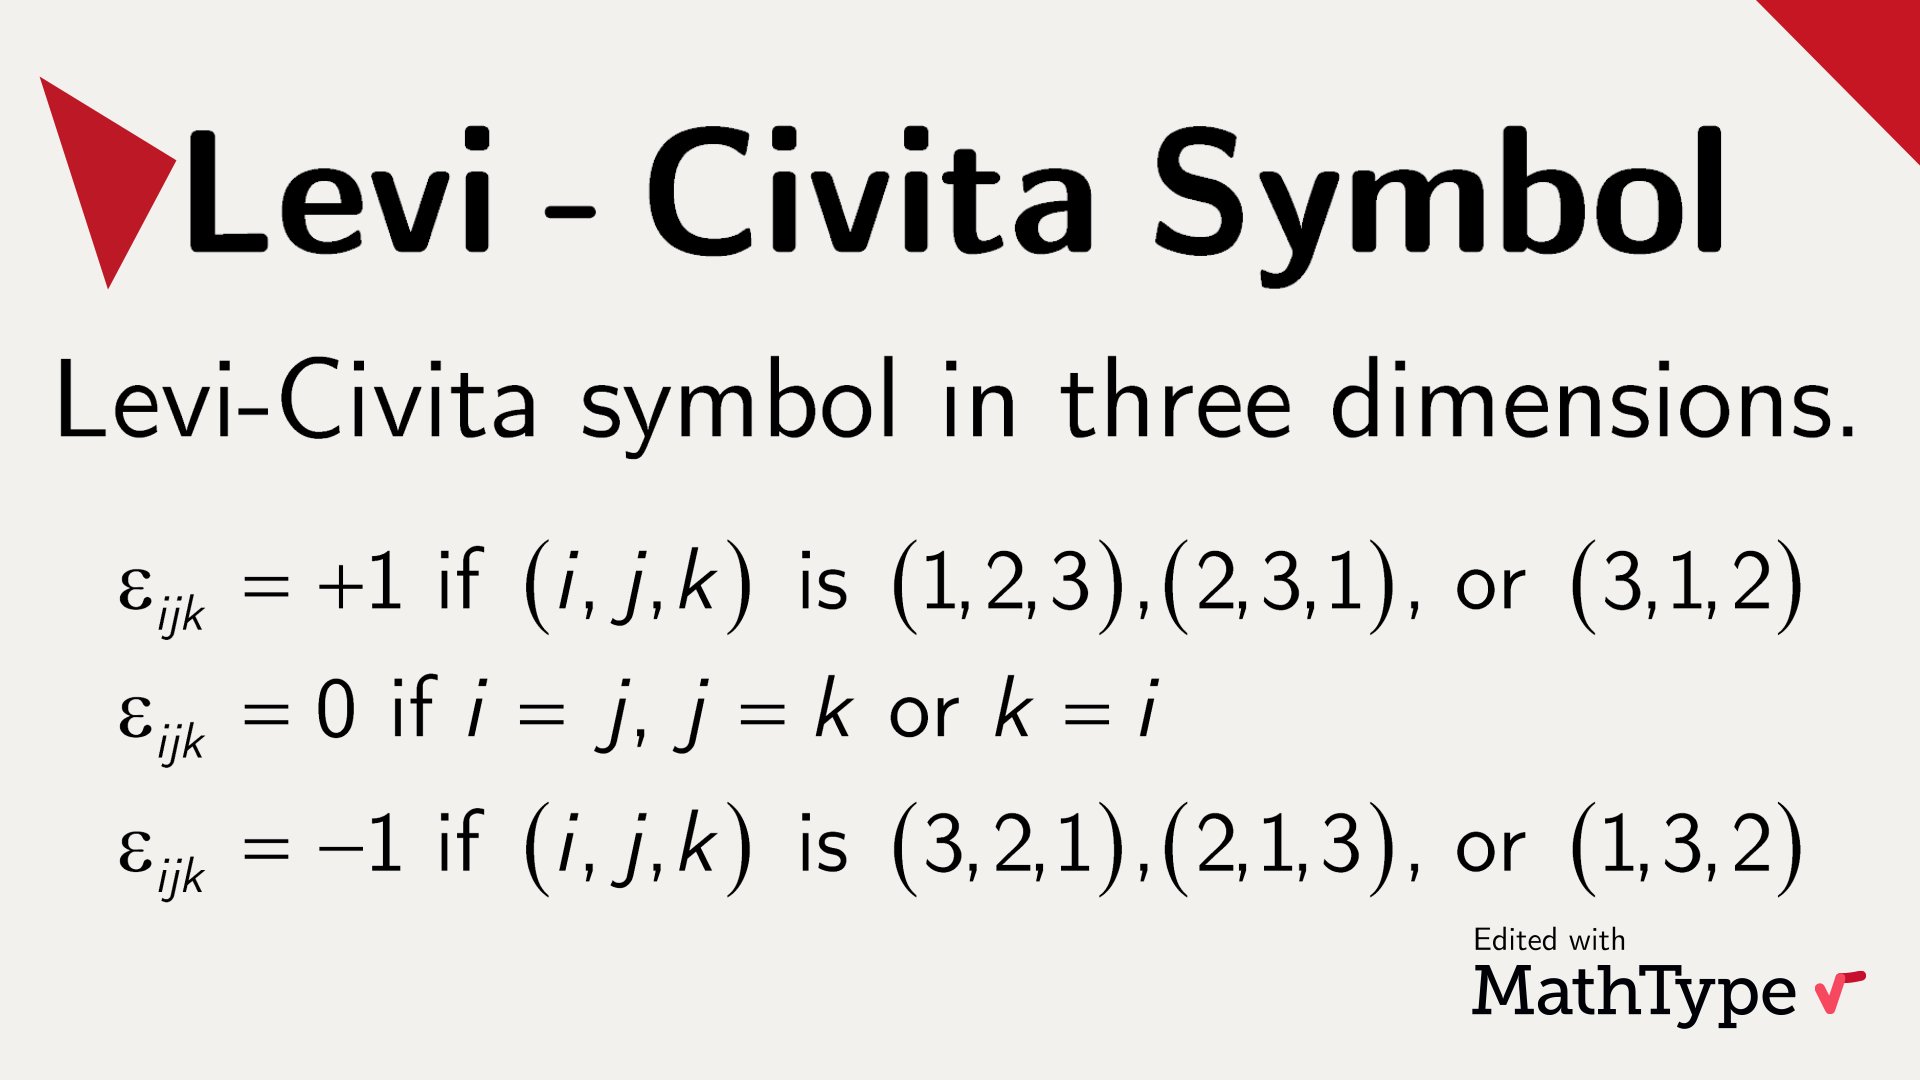 Eventyrer impuls Kontinent MathType on Twitter: "The Levi-Civita symbol is a three-index mathematical  object that gives us a result depending on the number of permutations of  the n natural numbers that form its indices. It